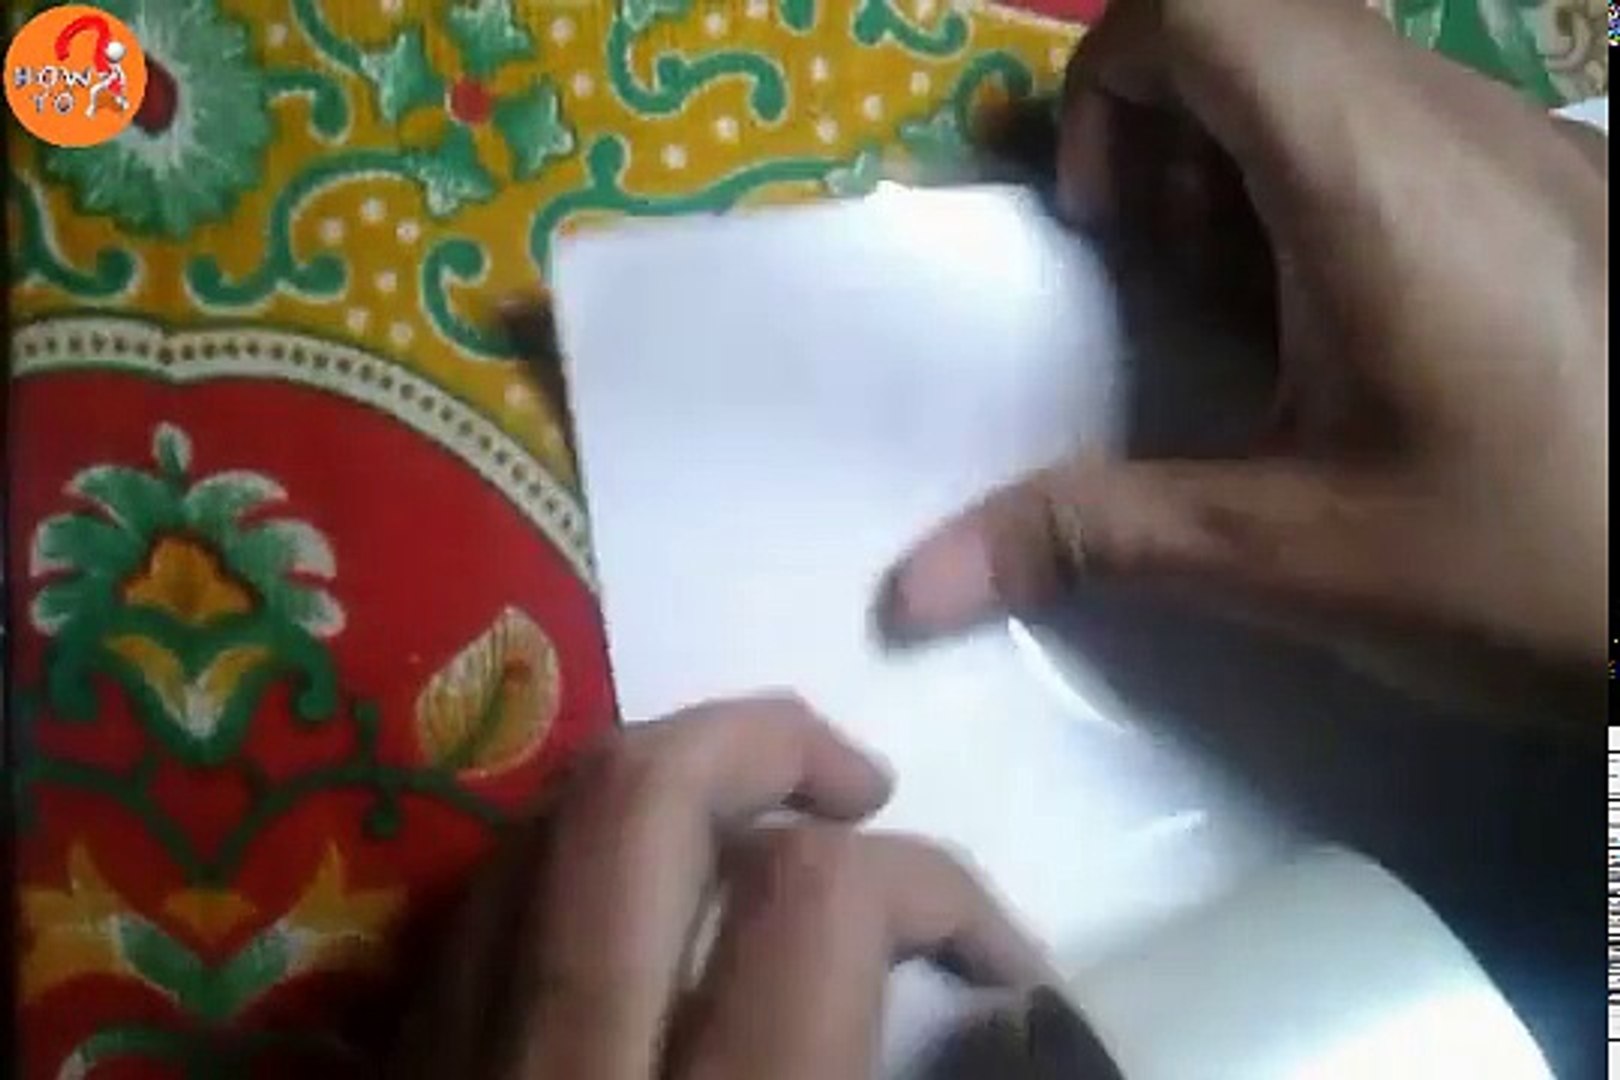 How To Make Temporary Tattoo At Home Using Printer (Without Tattoo Paper)